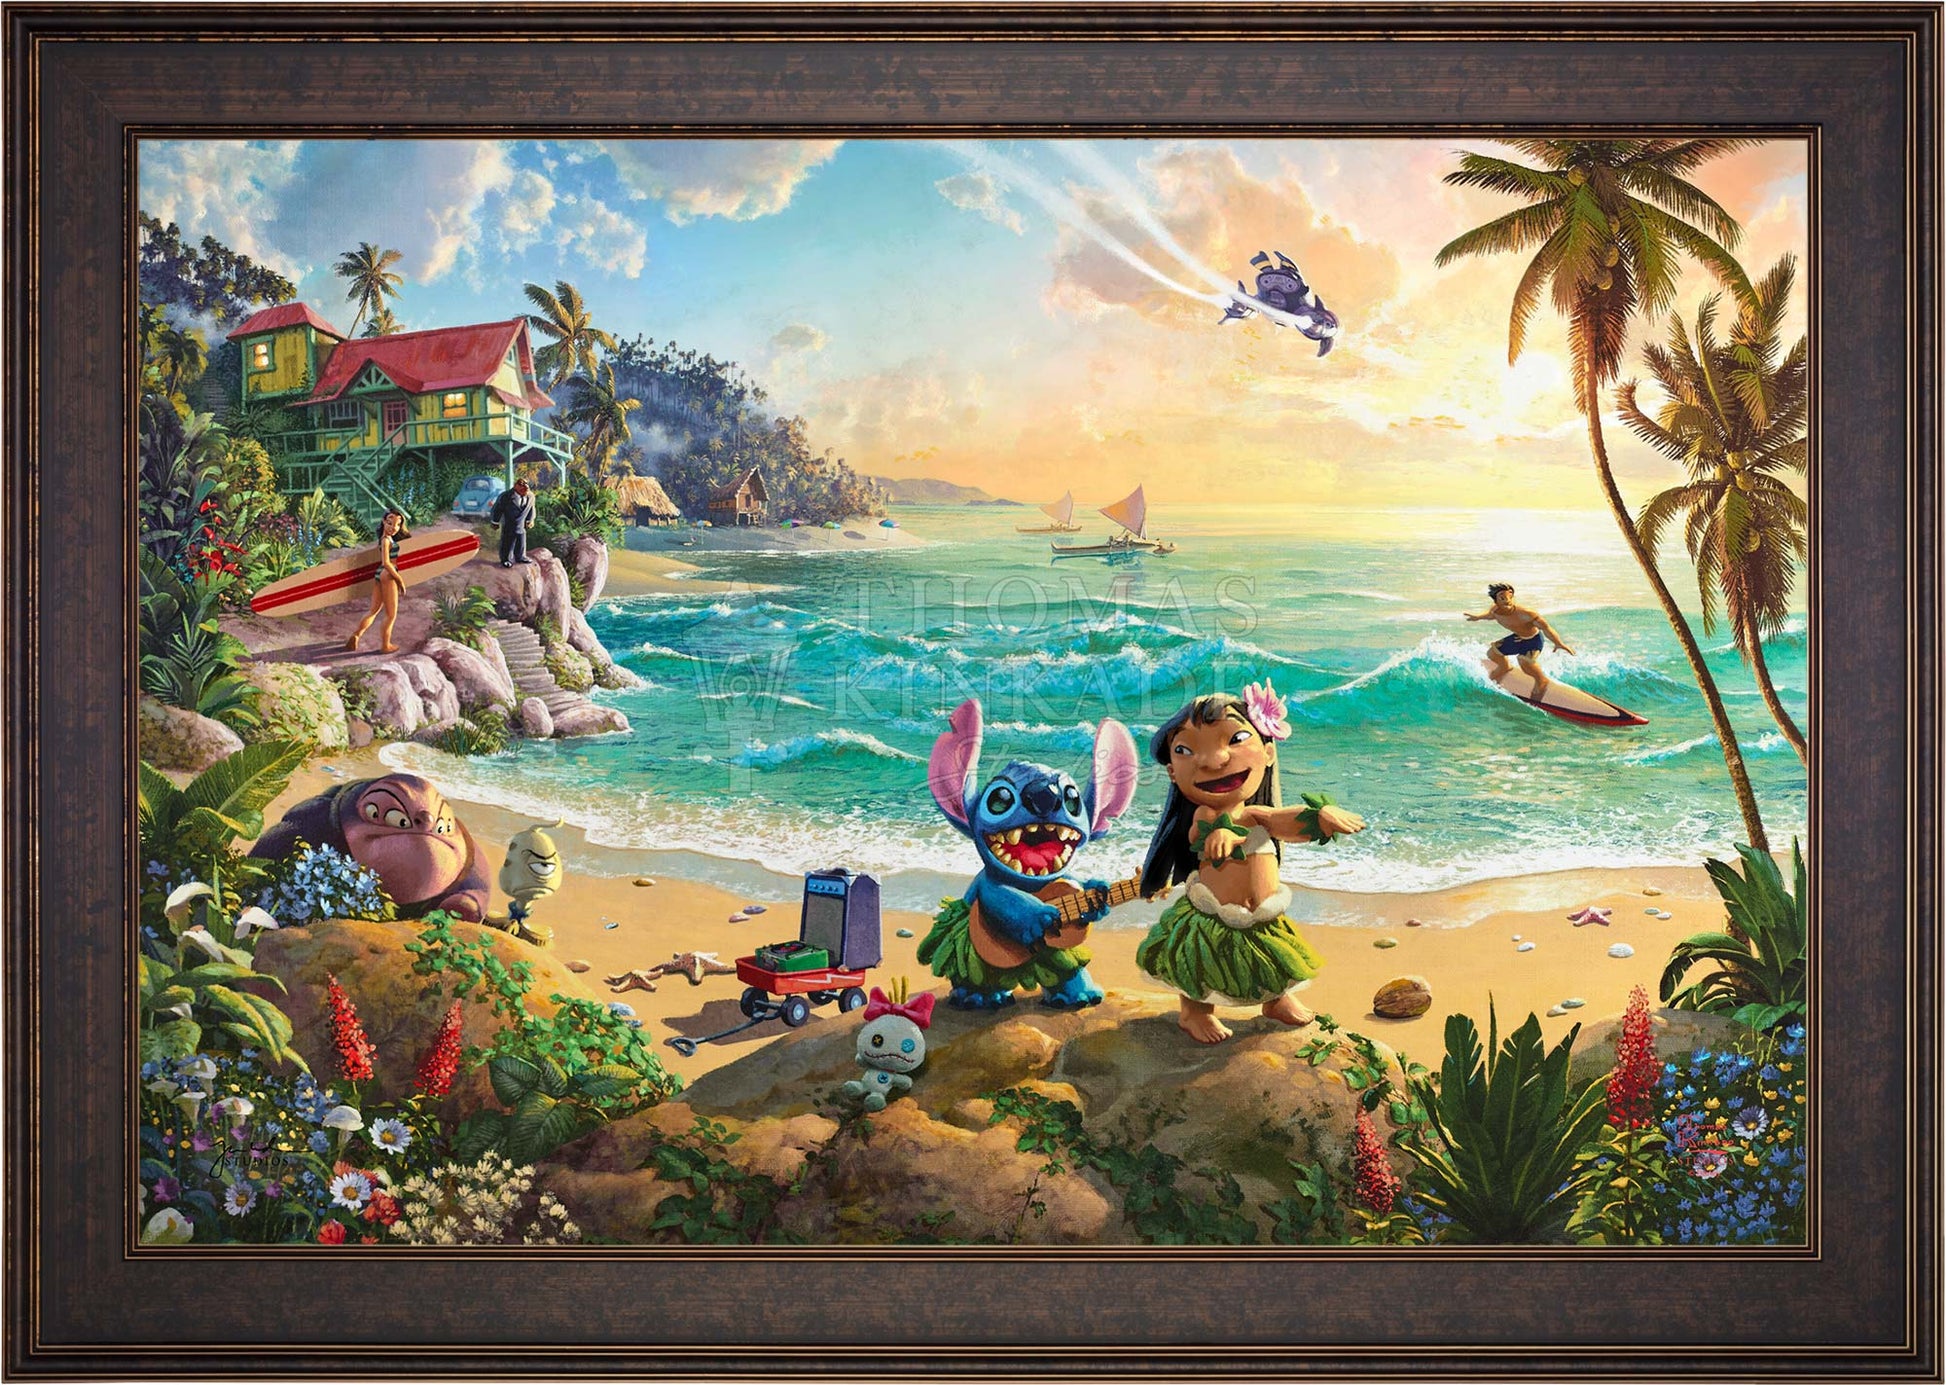 Lilo And Stitch Jigsaw Puzzles for Sale